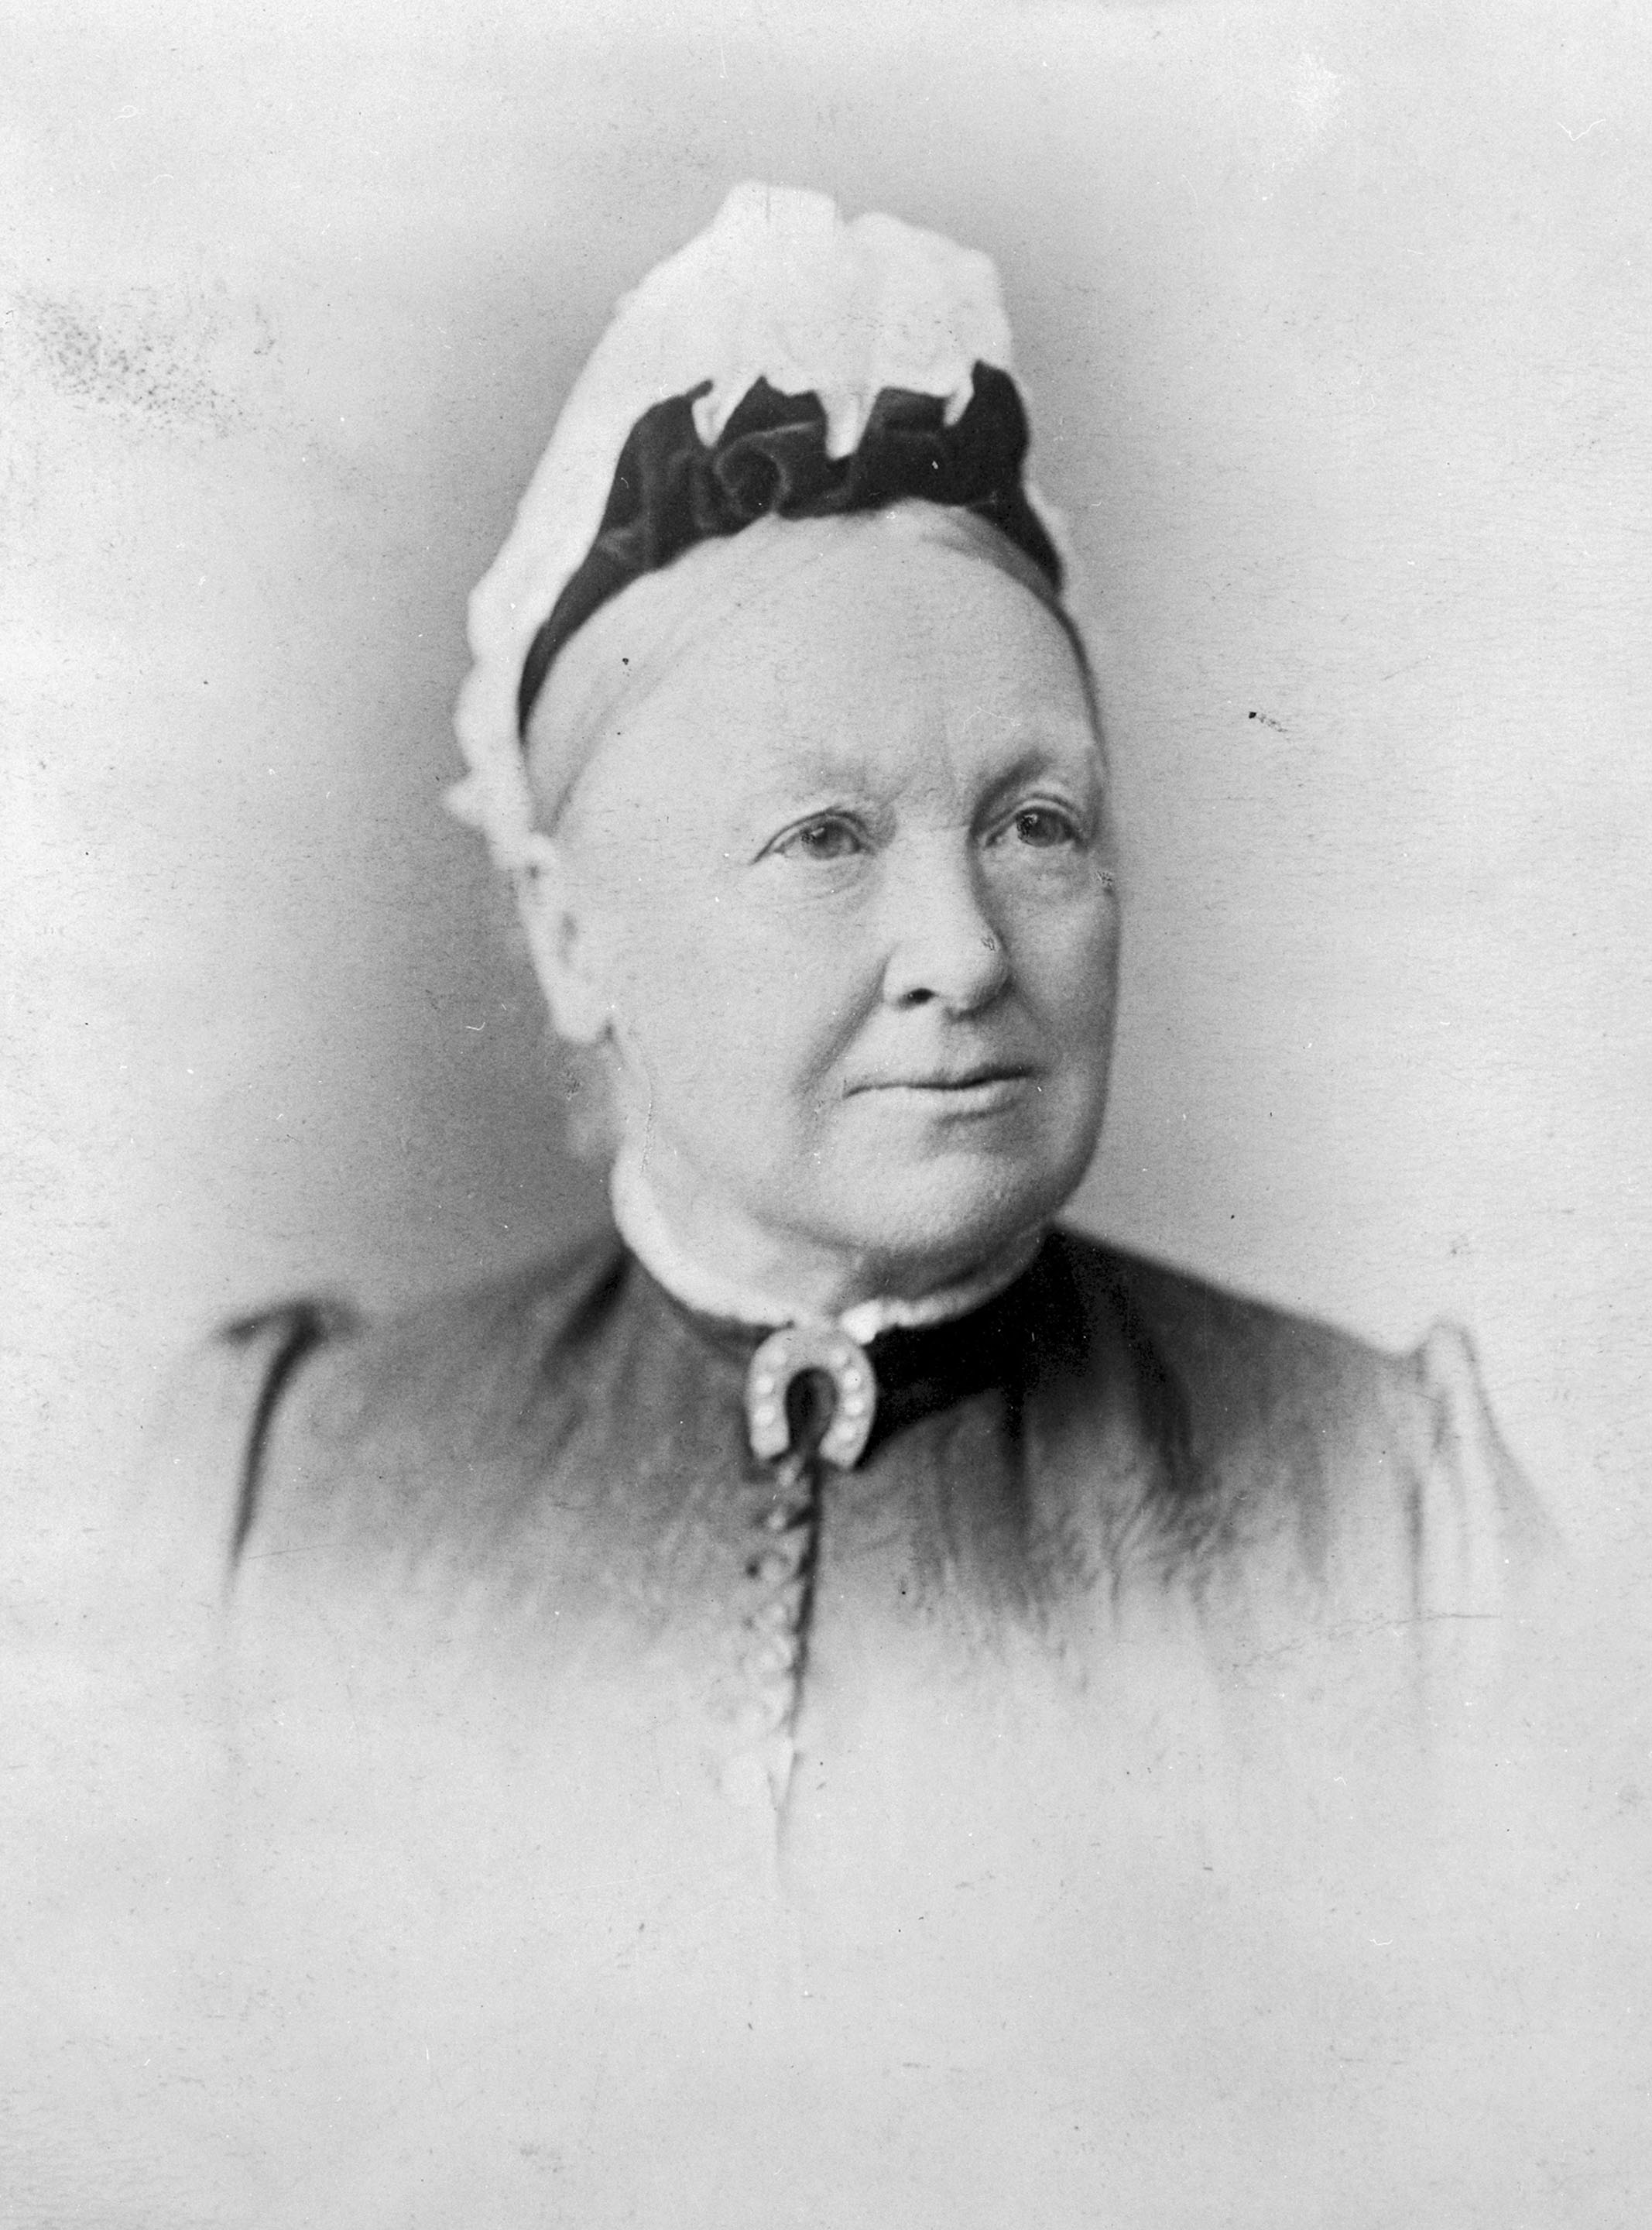 Catherine Helen Spence, a member of the South Australian Women’s Suffrage League